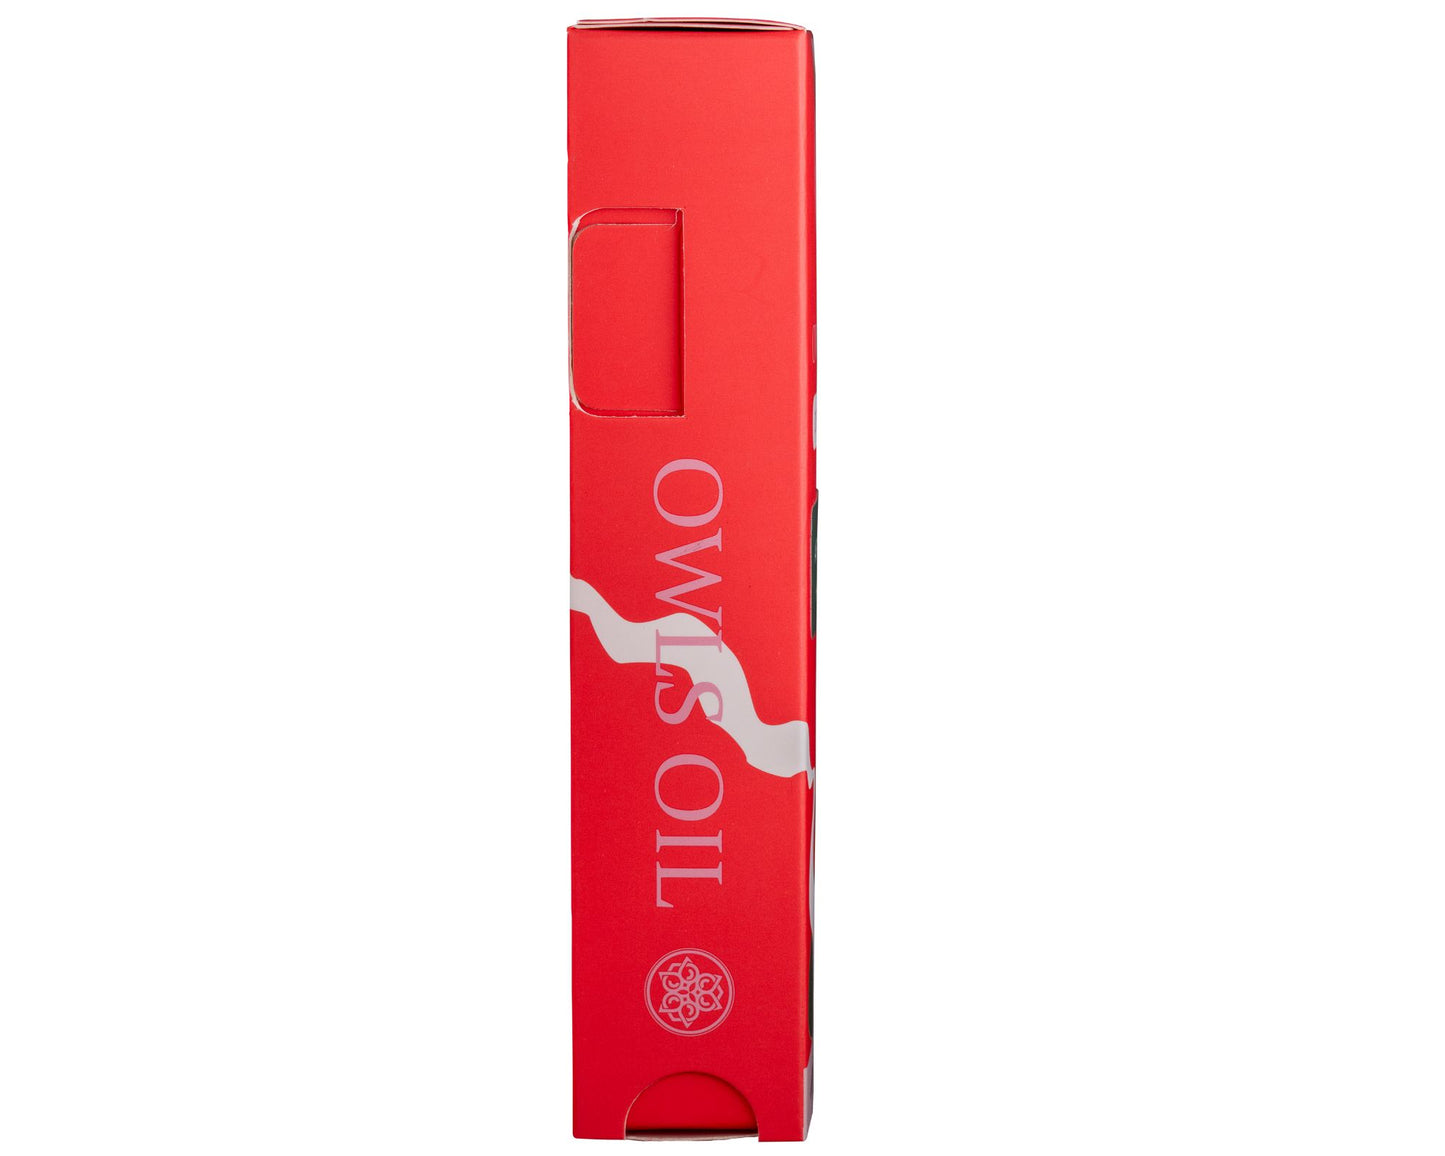 OWLS OIL DISPOSABLE HHC POD – 3000mg